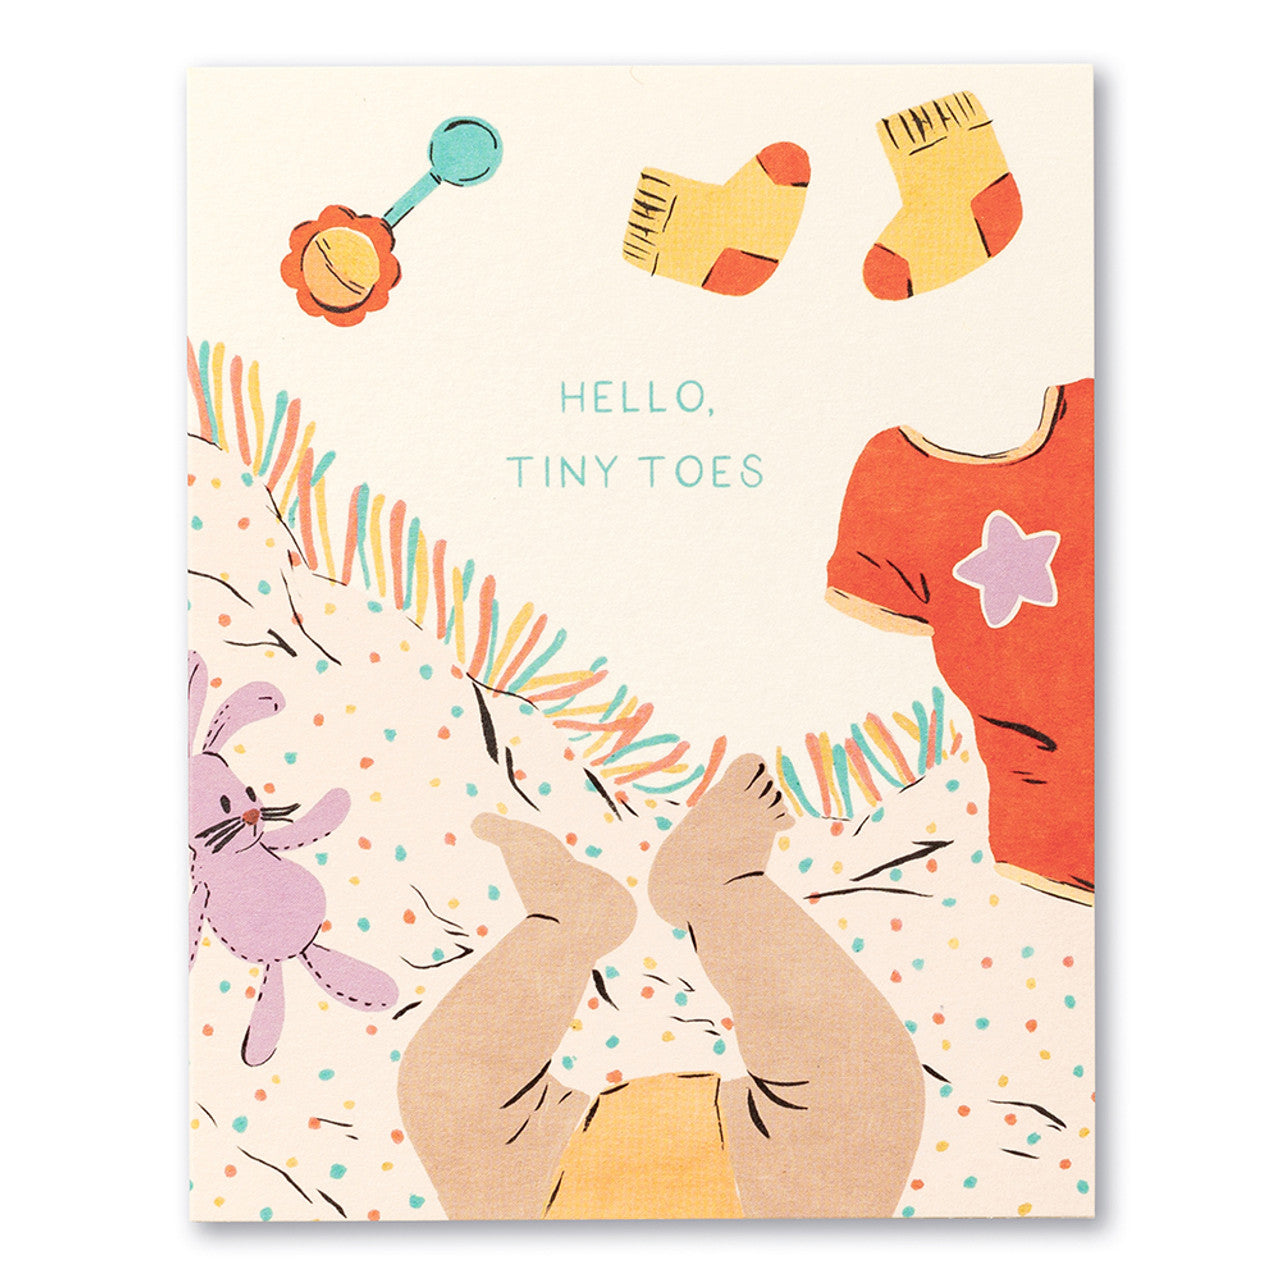 Welcome Baby Card - HELLO, TINY TOES.